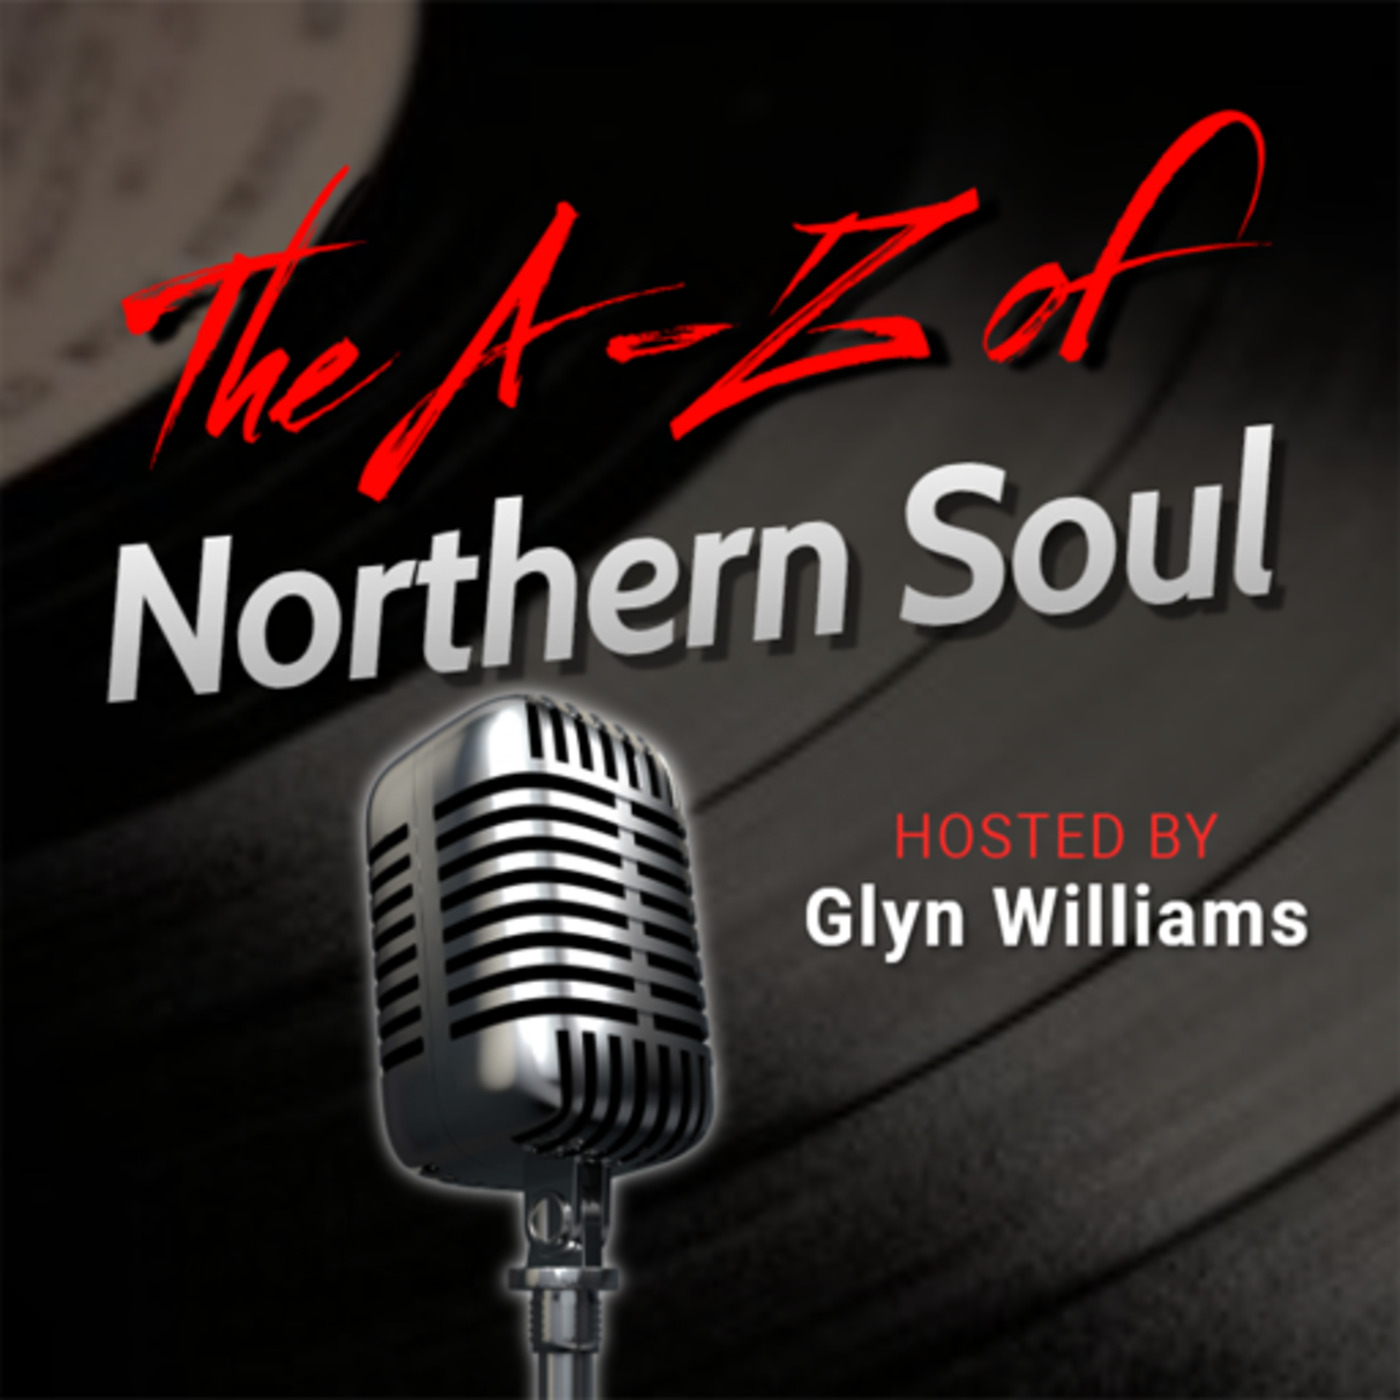 The A-Z of Northern Soul E047